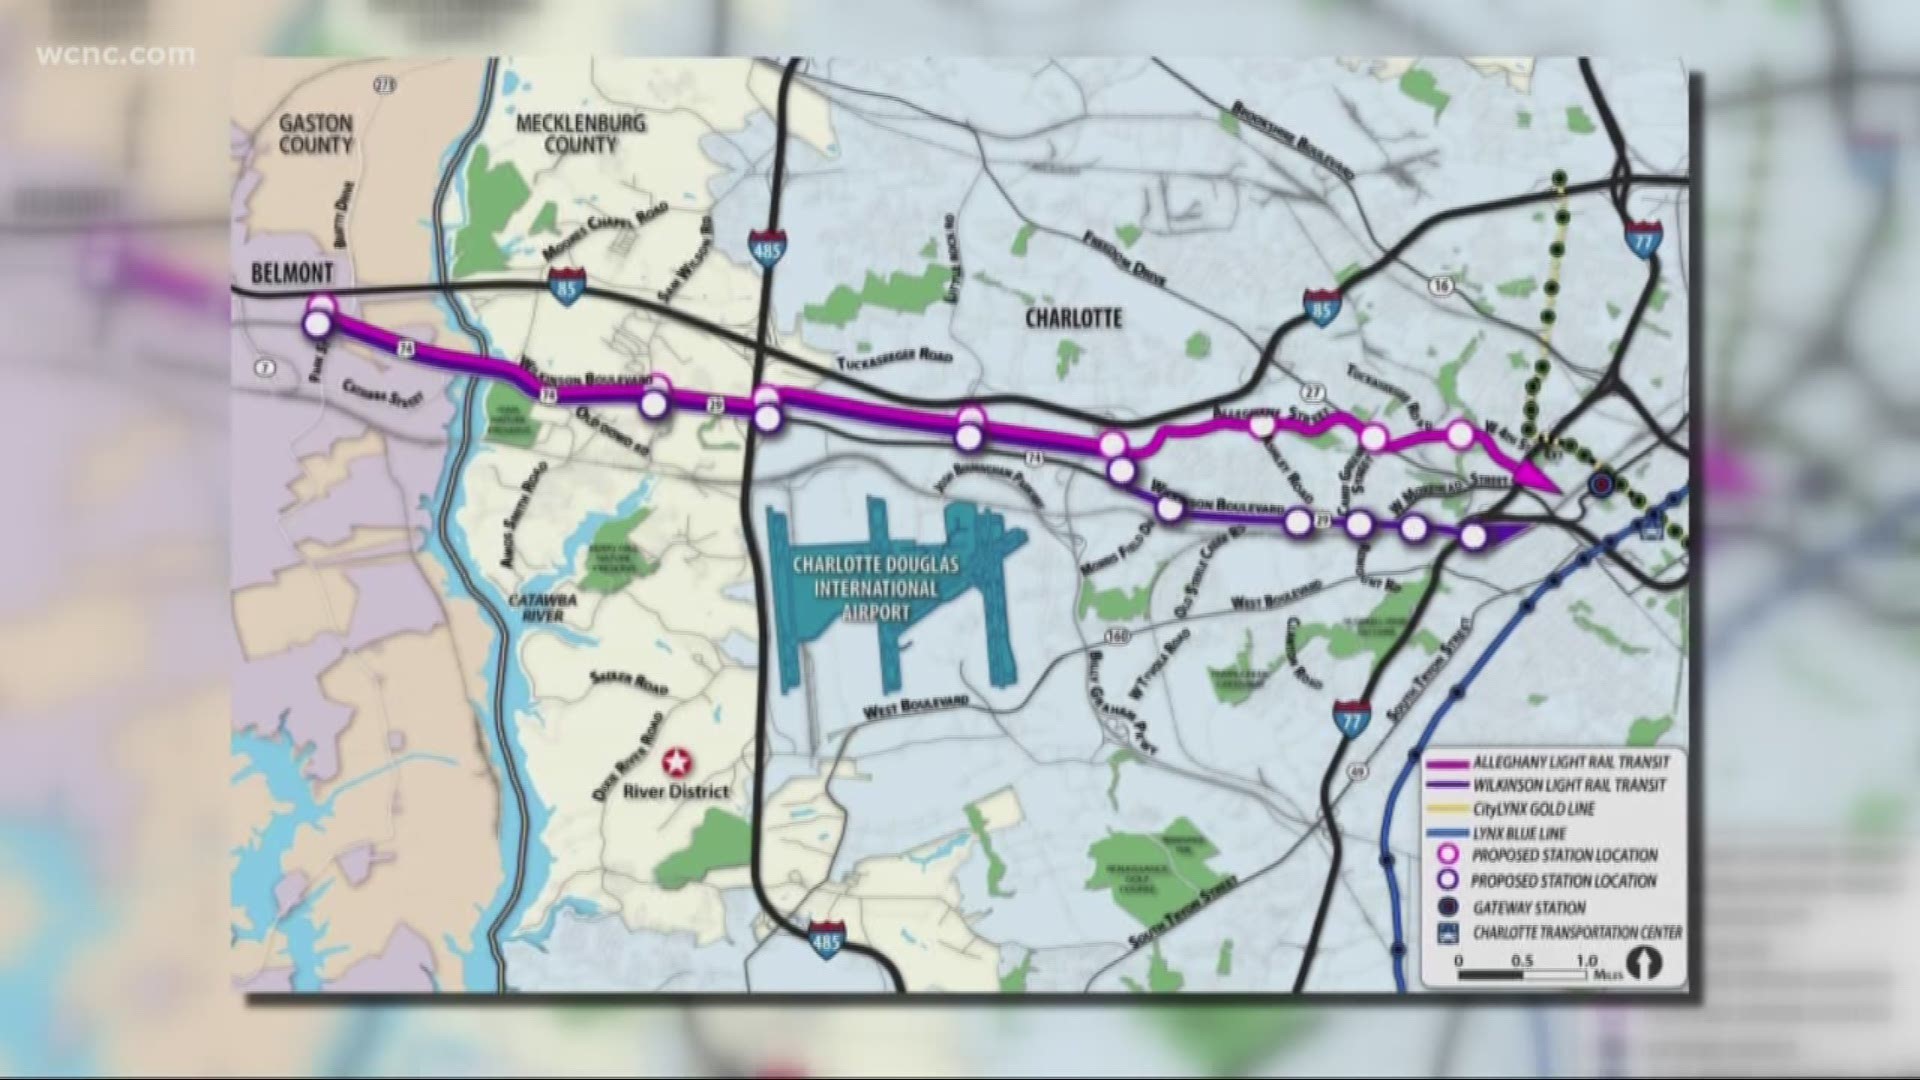 Commuters in Gaston County are pushing to extend the light rail from uptown Charlotte to Belmont, including a stop at Charlotte Douglas International Airport.